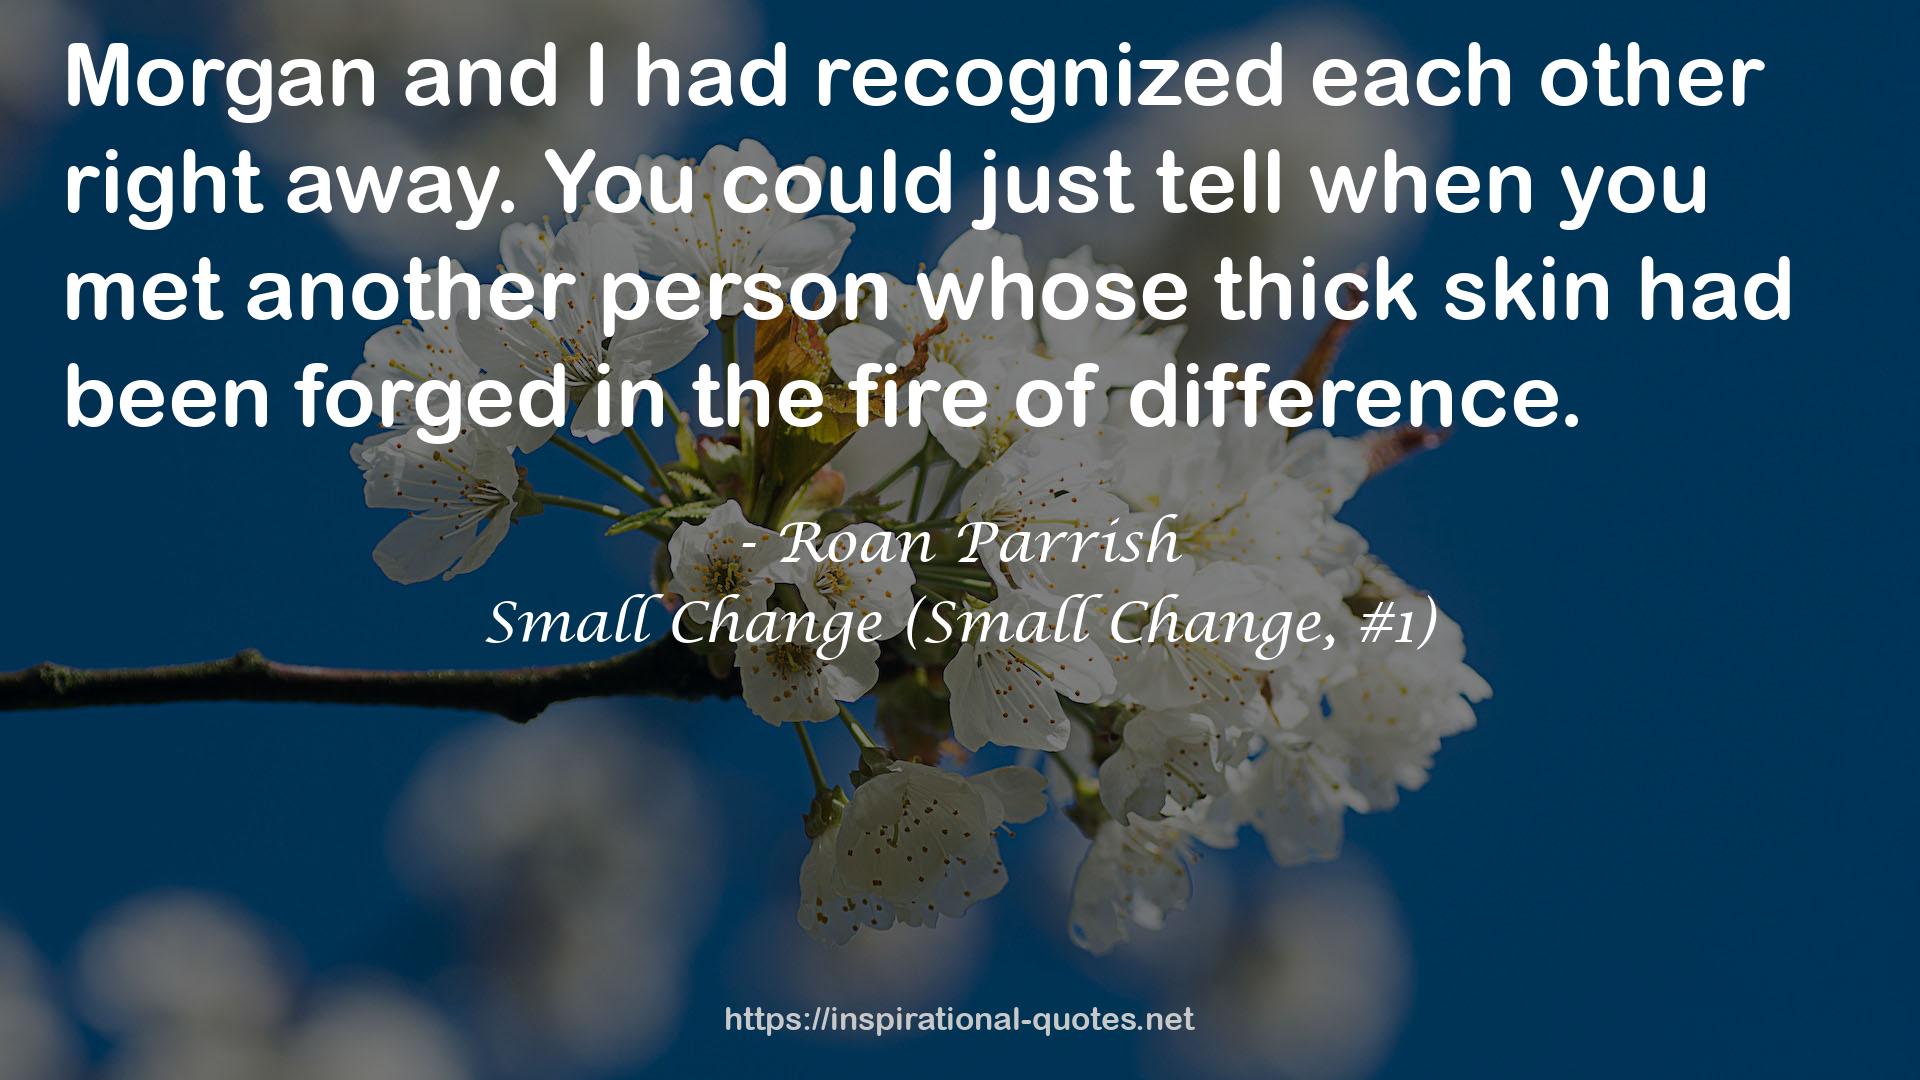 Small Change (Small Change, #1) QUOTES